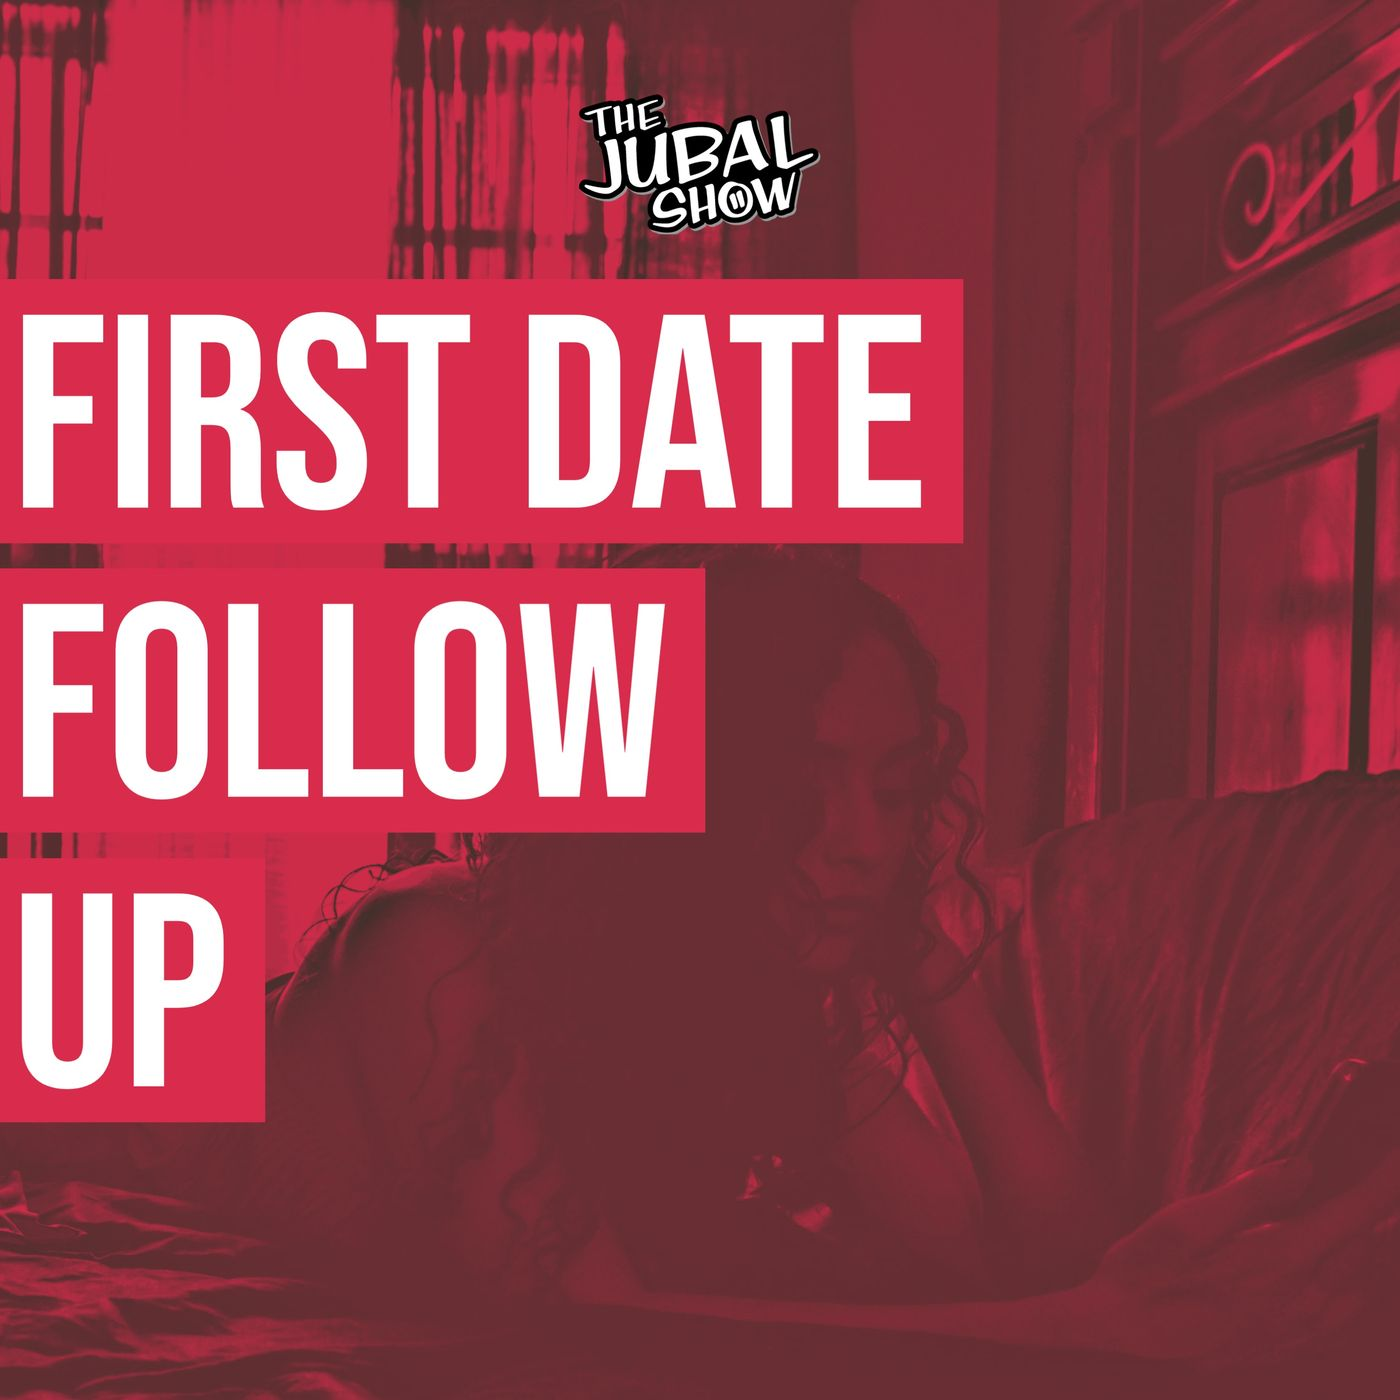 This First Date Follow Up has some creepy vibes!